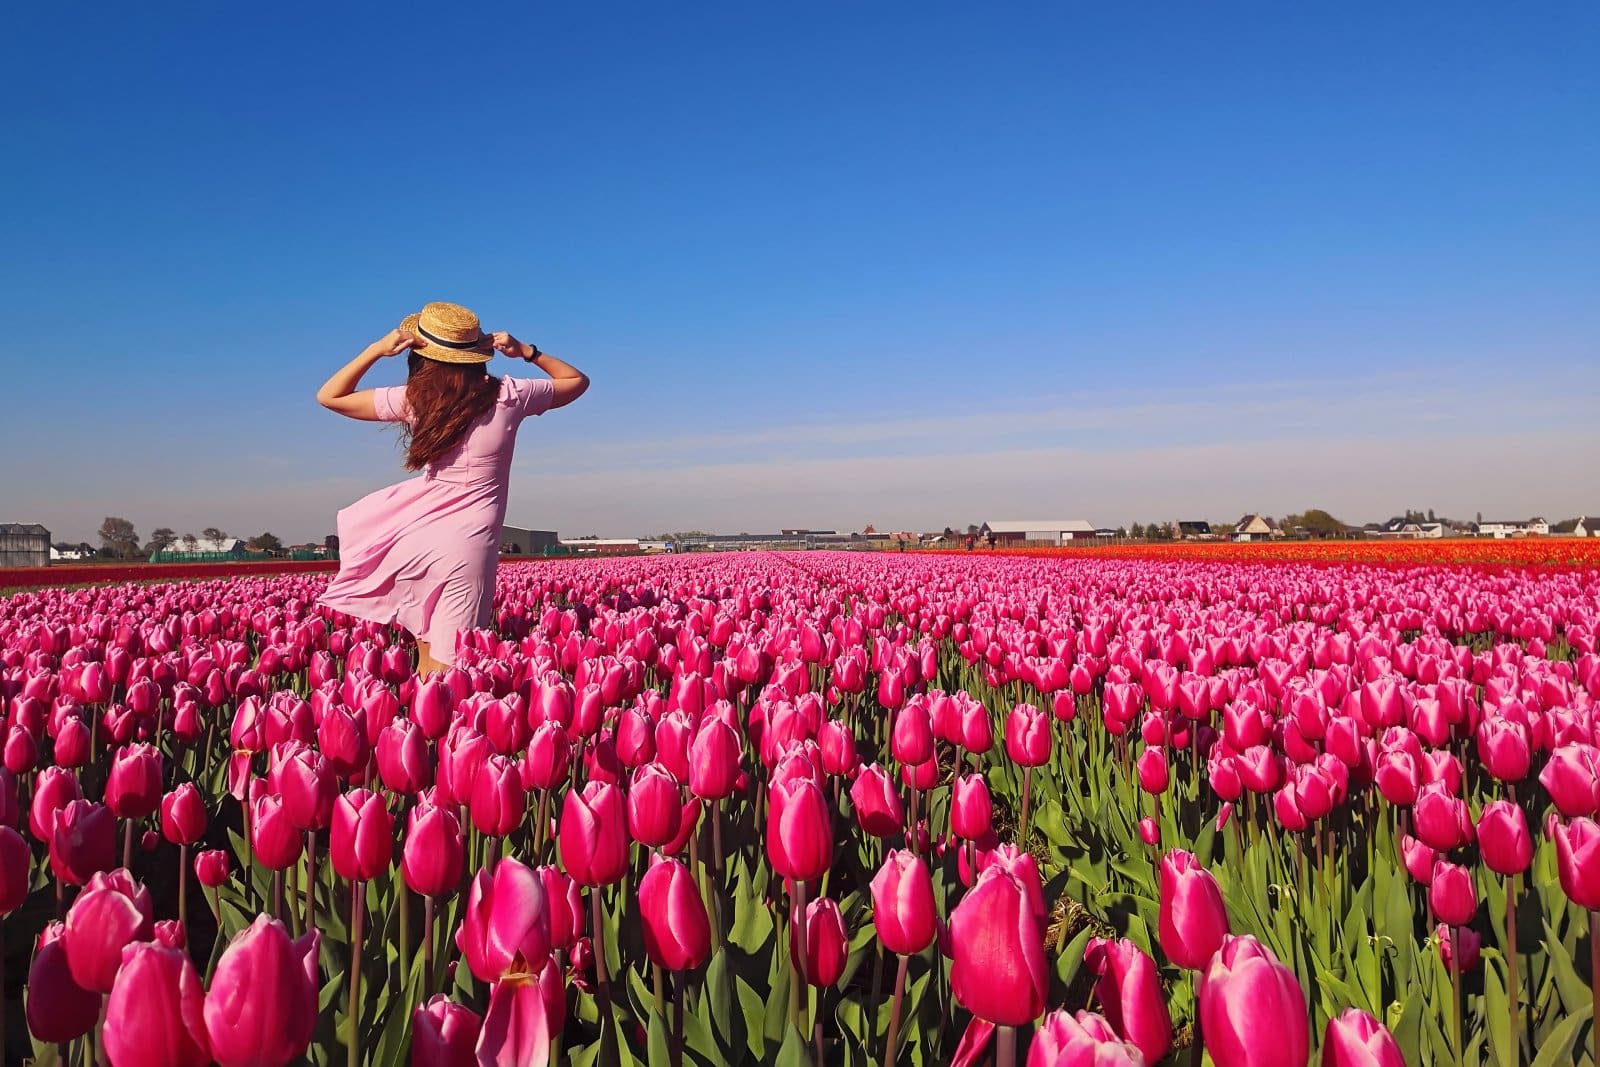 <p class="wp-caption-text">Image Credit: Shutterstock / Chiociolla</p>  <p>The first recorded speculative bubble burst over tulips, with some bulbs trading for the price of a luxury home. When the market crashed, it left many in financial ruin.</p>